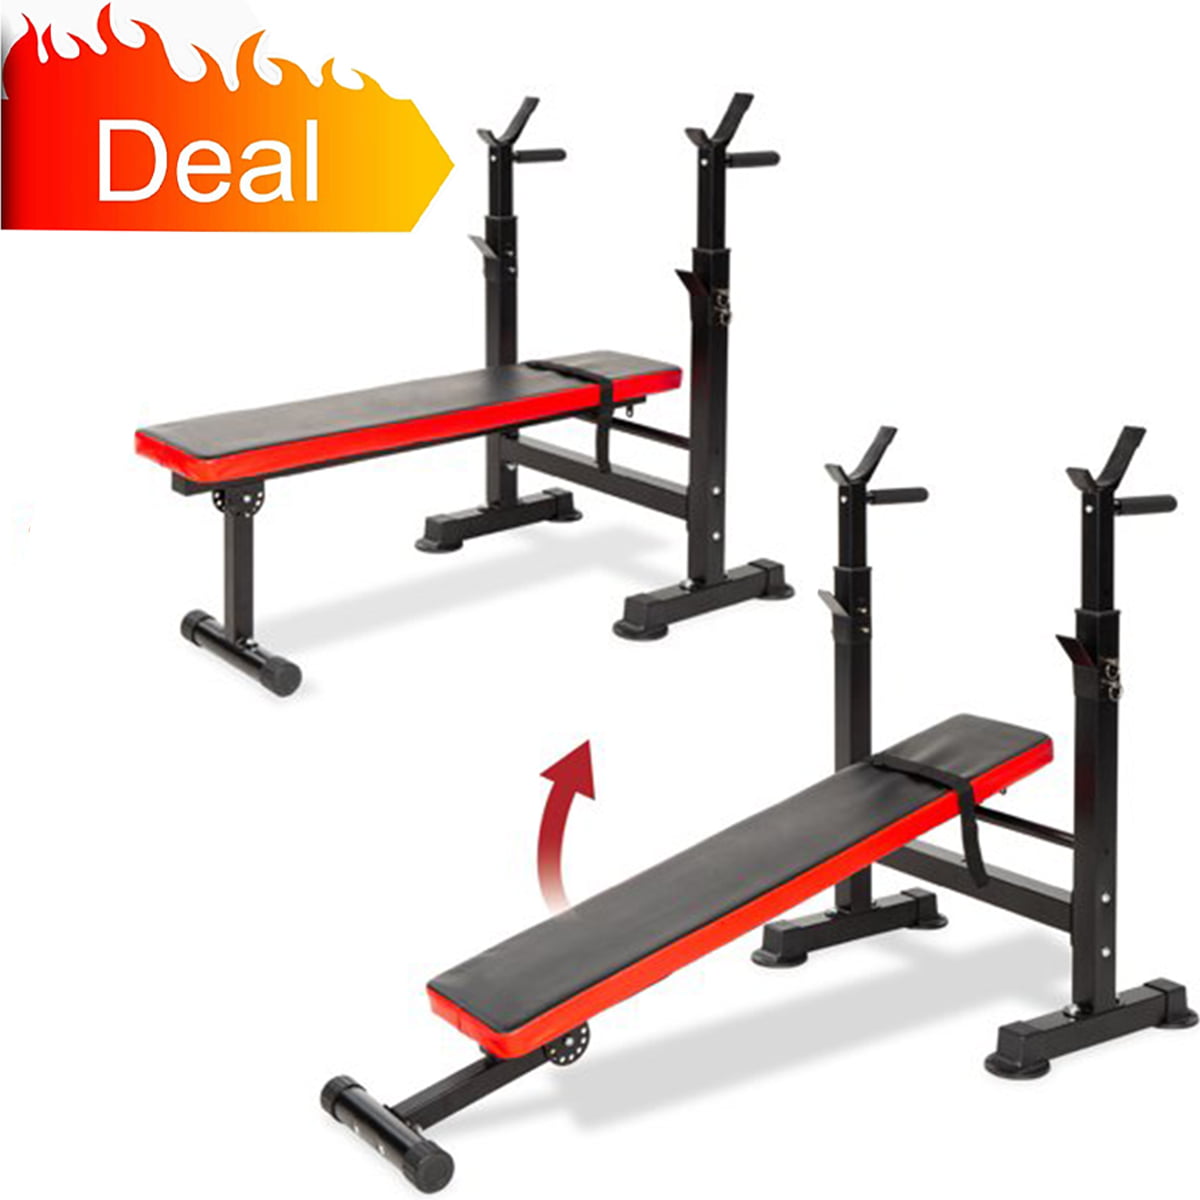 Adjustable Weight Lifting Bench Combo Fitness Home Gym Bench Rack Workout Red US 